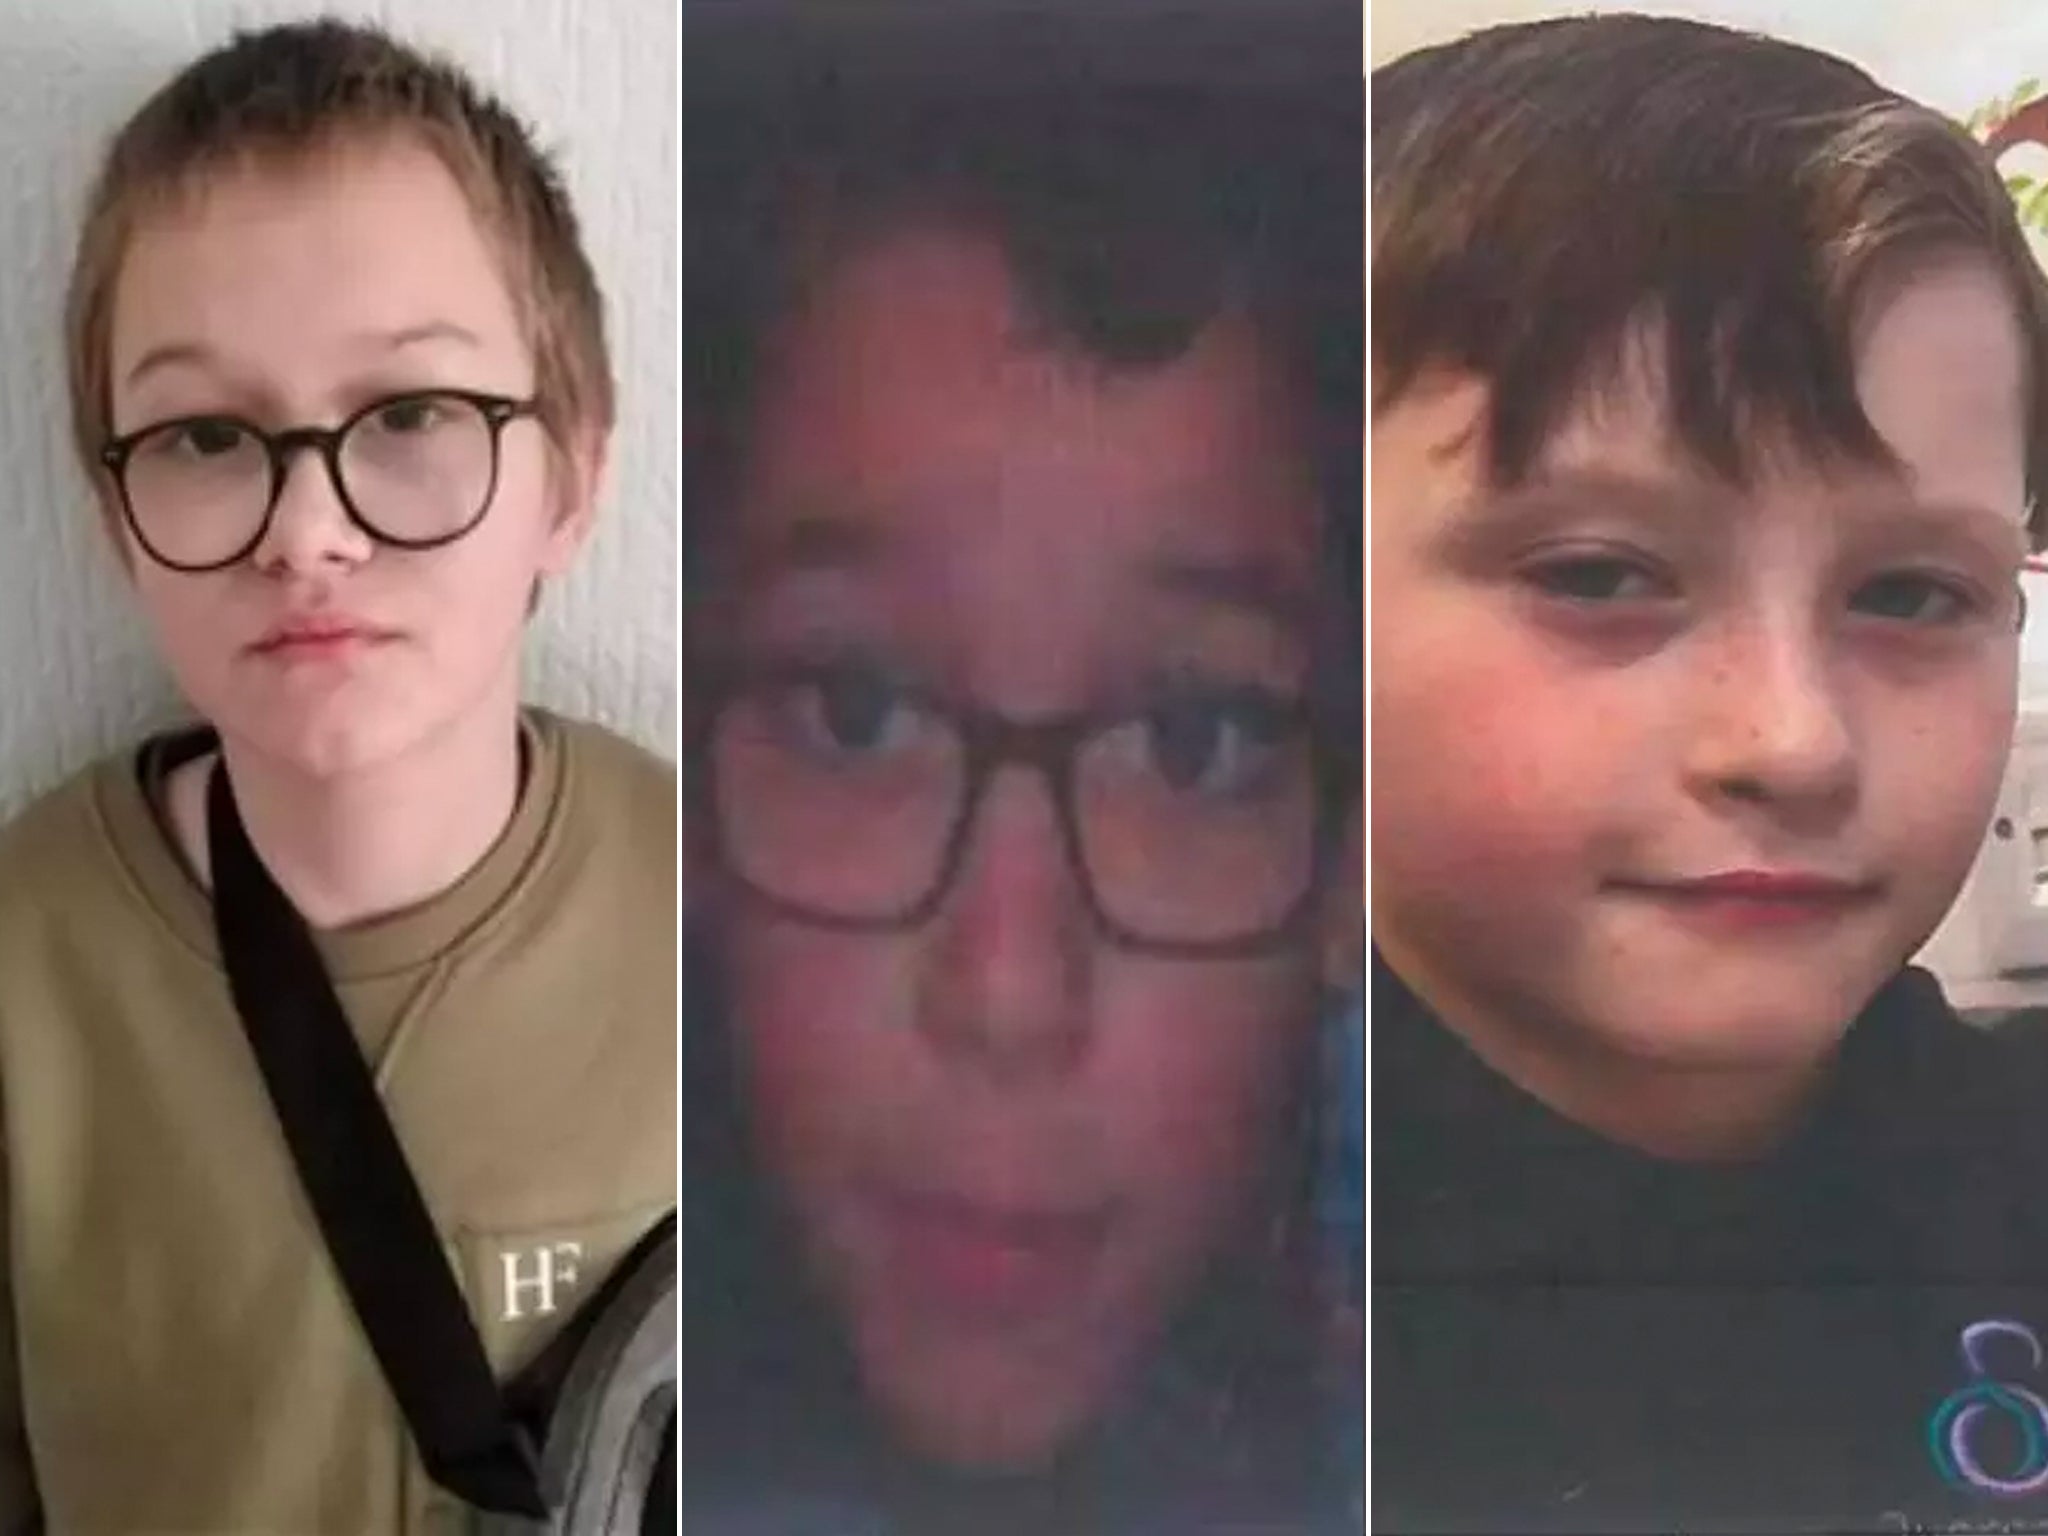 Harley Anderton, Kye Hollingworth and Logan Gray have all been reported missing